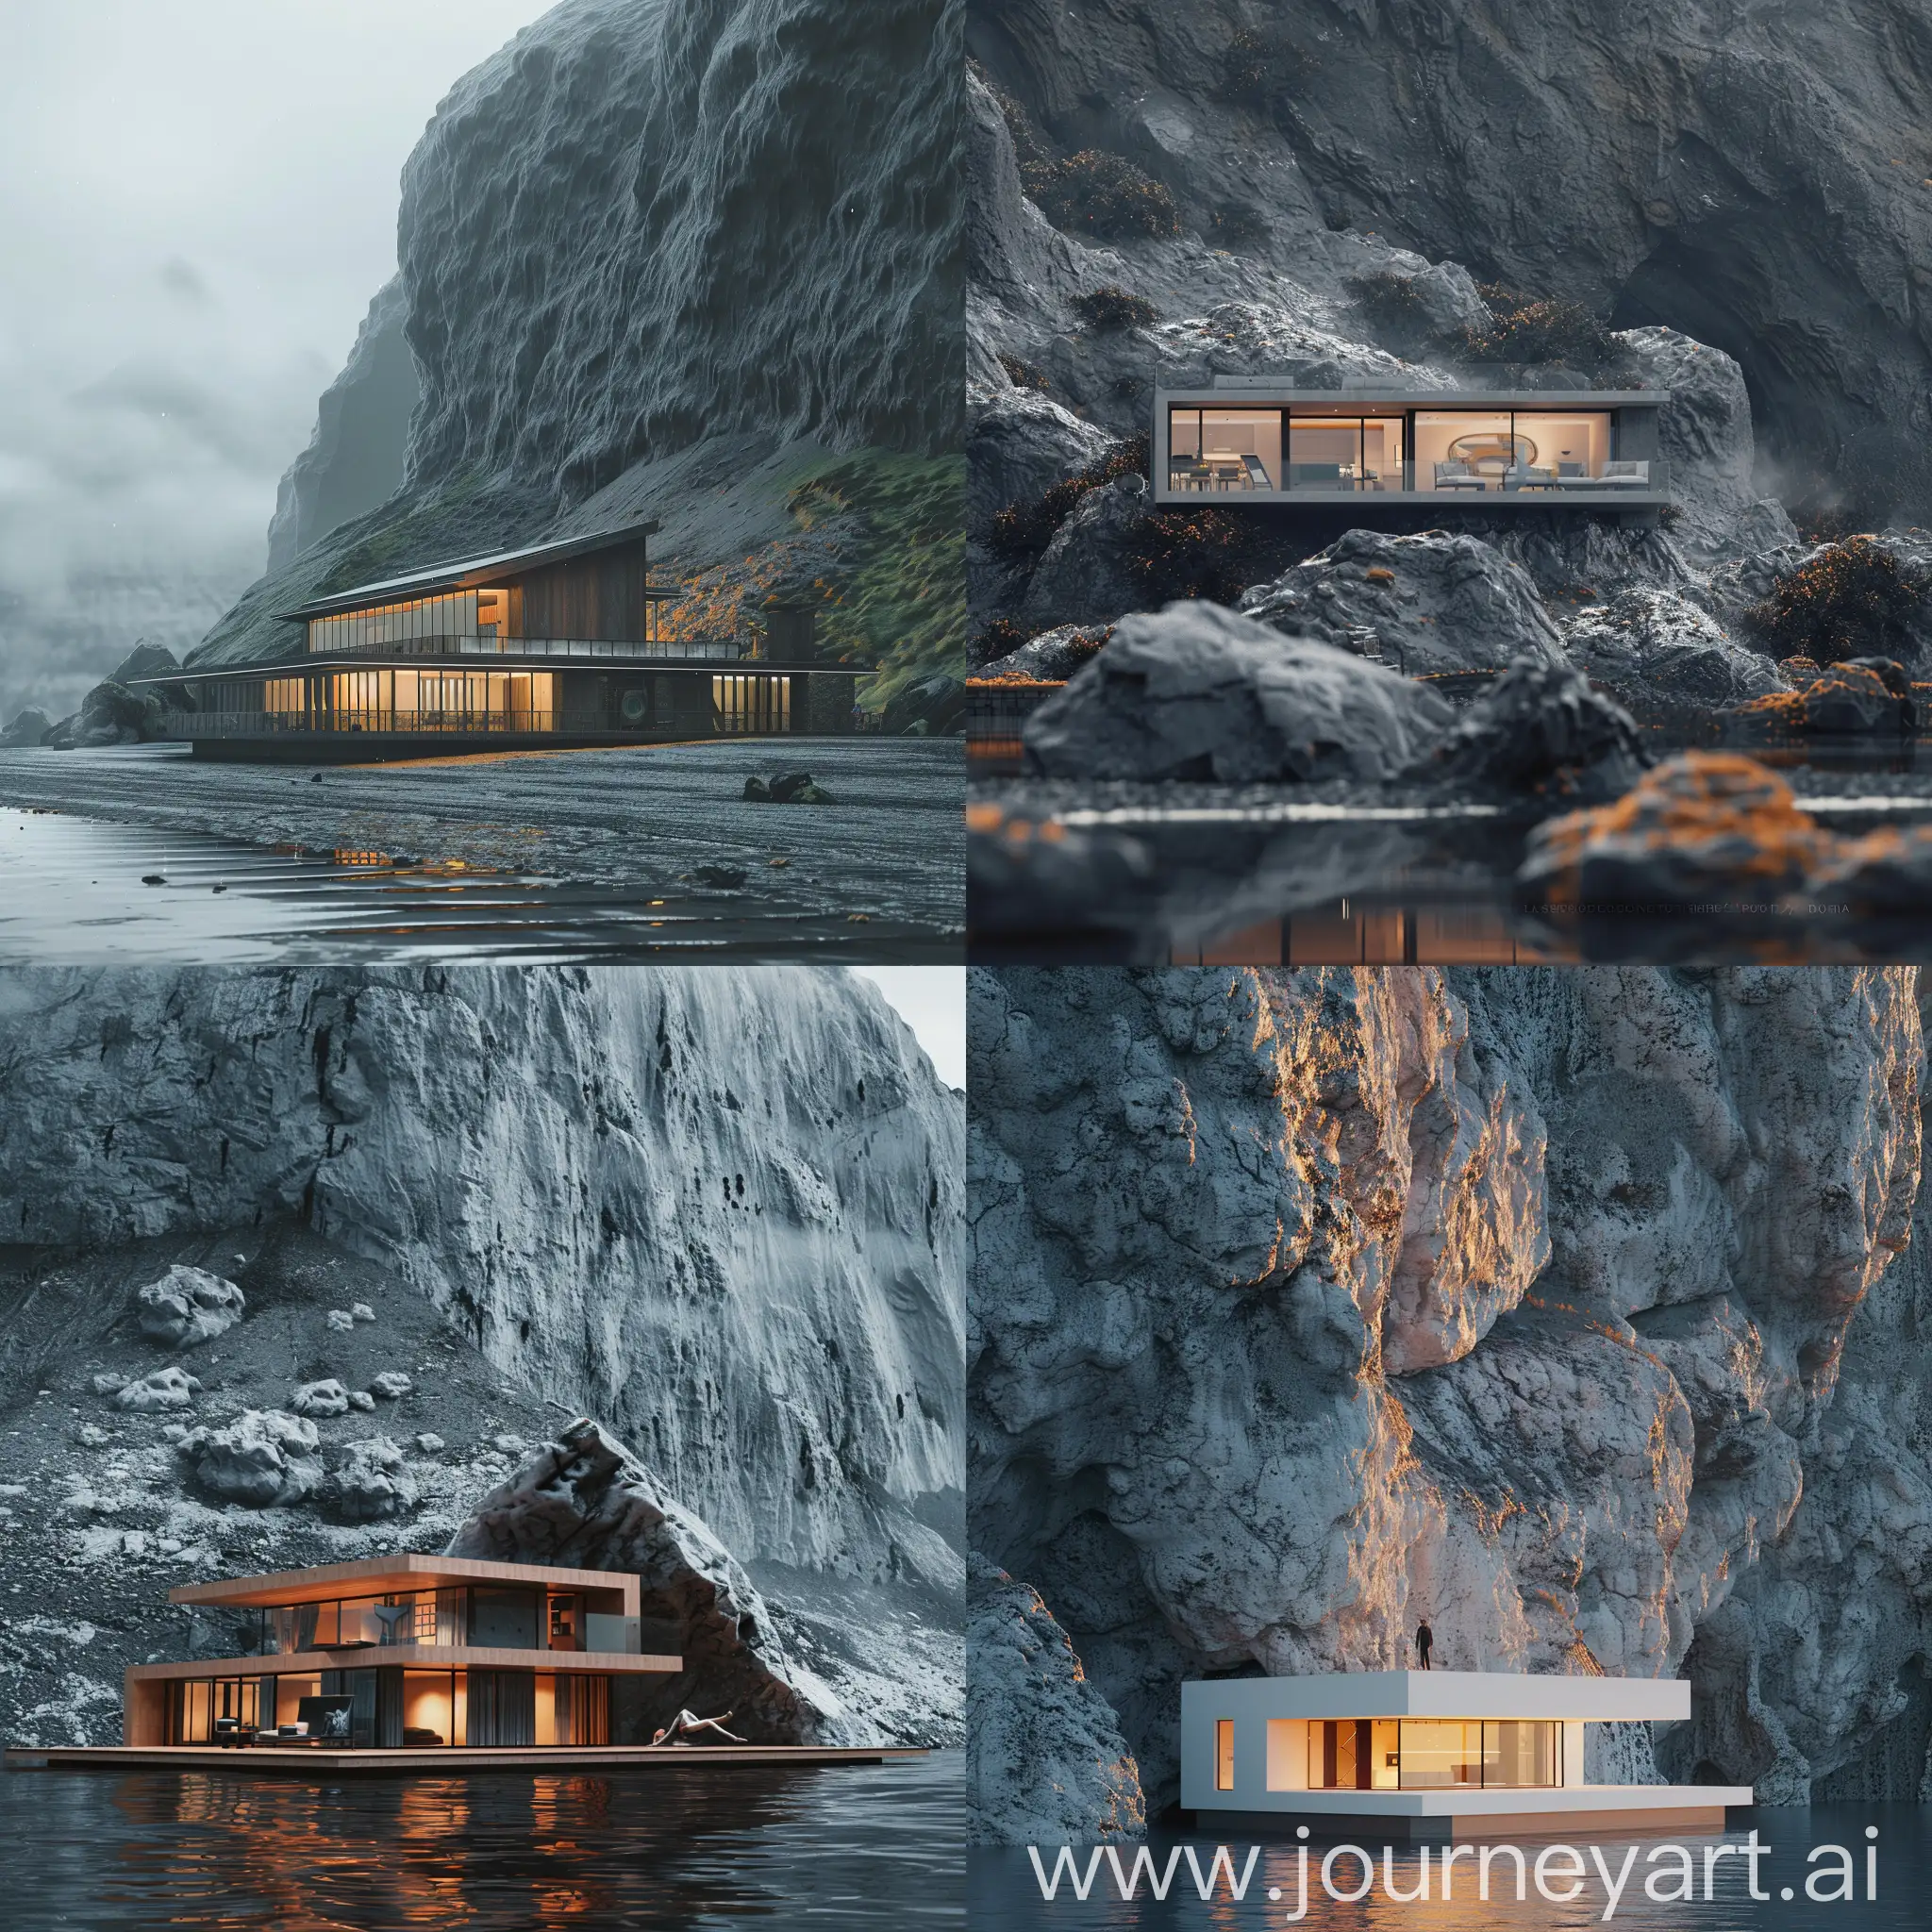 Minimalistic House on the background of a huge mountain, HD, cinematography, photorealistic, epic composition Unreal Engine, Cinematic, Color Grading, portrait Photography, Wide Angle, Depth of Field, hyper-detailed, beautifully color-coded, insane details, intricate details, beautifully color graded, Unreal Engine, Cinematic, Color Grading, Editorial Photography, Photography, Photoshoot, Depth of Field, DOF, Tilt Blur, White Balance, 32k, Super-Resolution, Megapixel, ProPhoto RGB, VR, Halfrear Lighting, Backlight, Natural Lighting, Incandescent, Optical Fiber, Moody Lighting, Cinematic Lighting, Studio Lighting, Soft Lighting, Volumetric, Contre-Jour, Beautiful Lighting, Accent Lighting, Global Illumination, Screen Space Global Illumination, Ray Tracing Global Illumination, Optics, Scattering, Glowing, Shadows, Rough, Shimmering, Ray Tracing Reflections, Lumen Reflections, Screen Space Reflections, Diffraction Grading, Chromatic Aberration, GB Displacement, Scan Lines, Ray Traced, Ray Tracing Ambient Occlusion, Anti-Aliasing, FKAA, TXAA, RTX, SSAO, Shaders, OpenGL-Shaders, GLSL-Shaders, Post Processing, Post-Production, Cel Shading, Tone Mapping, CGI, VFX, SFX, insanely detailed and intricate, hypermaximalist, elegant, hyper realistic, super detailed, dynamic pose, photography --v 6.0